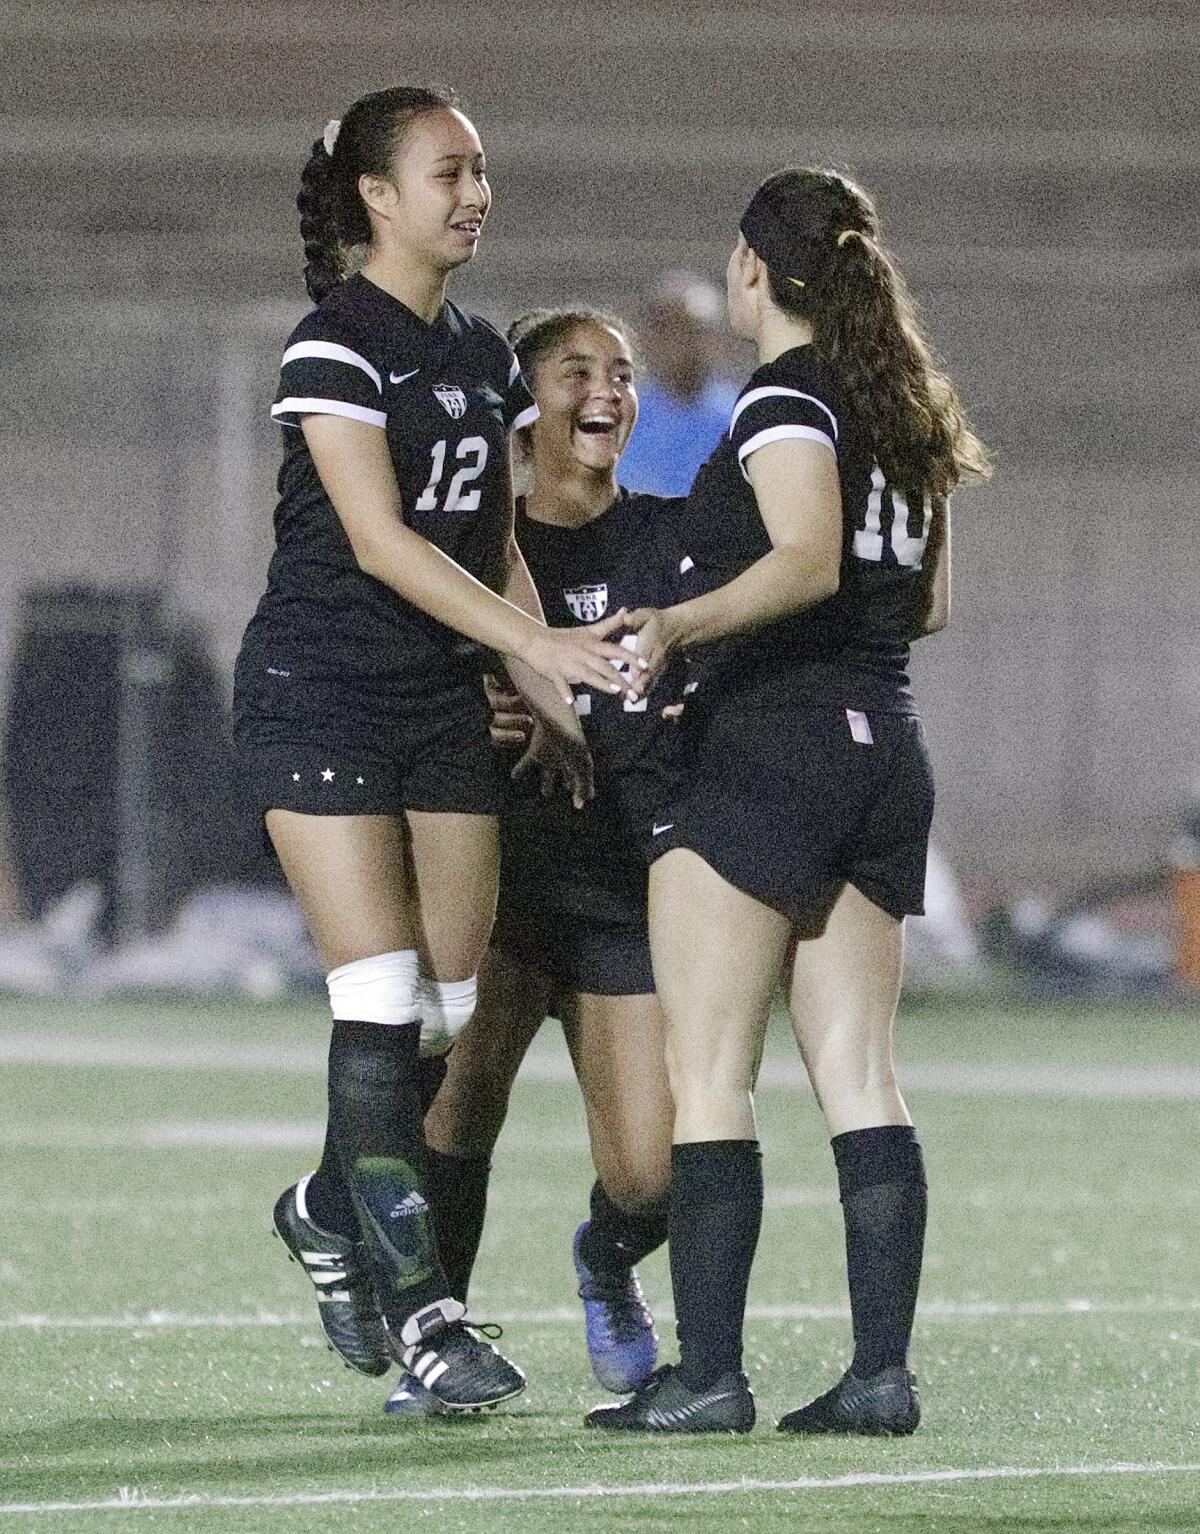 Flintridge Sacred Heart's Therese Daniels and Alexis Gazmarian greet teammate Helena Locateli at mid field after she scored the first goal of the game against Sherman Oaks Notre Dame in a Mission League girls' soccer game at Occidental College in Los Angeles on Wednesday, January 8, 2020.